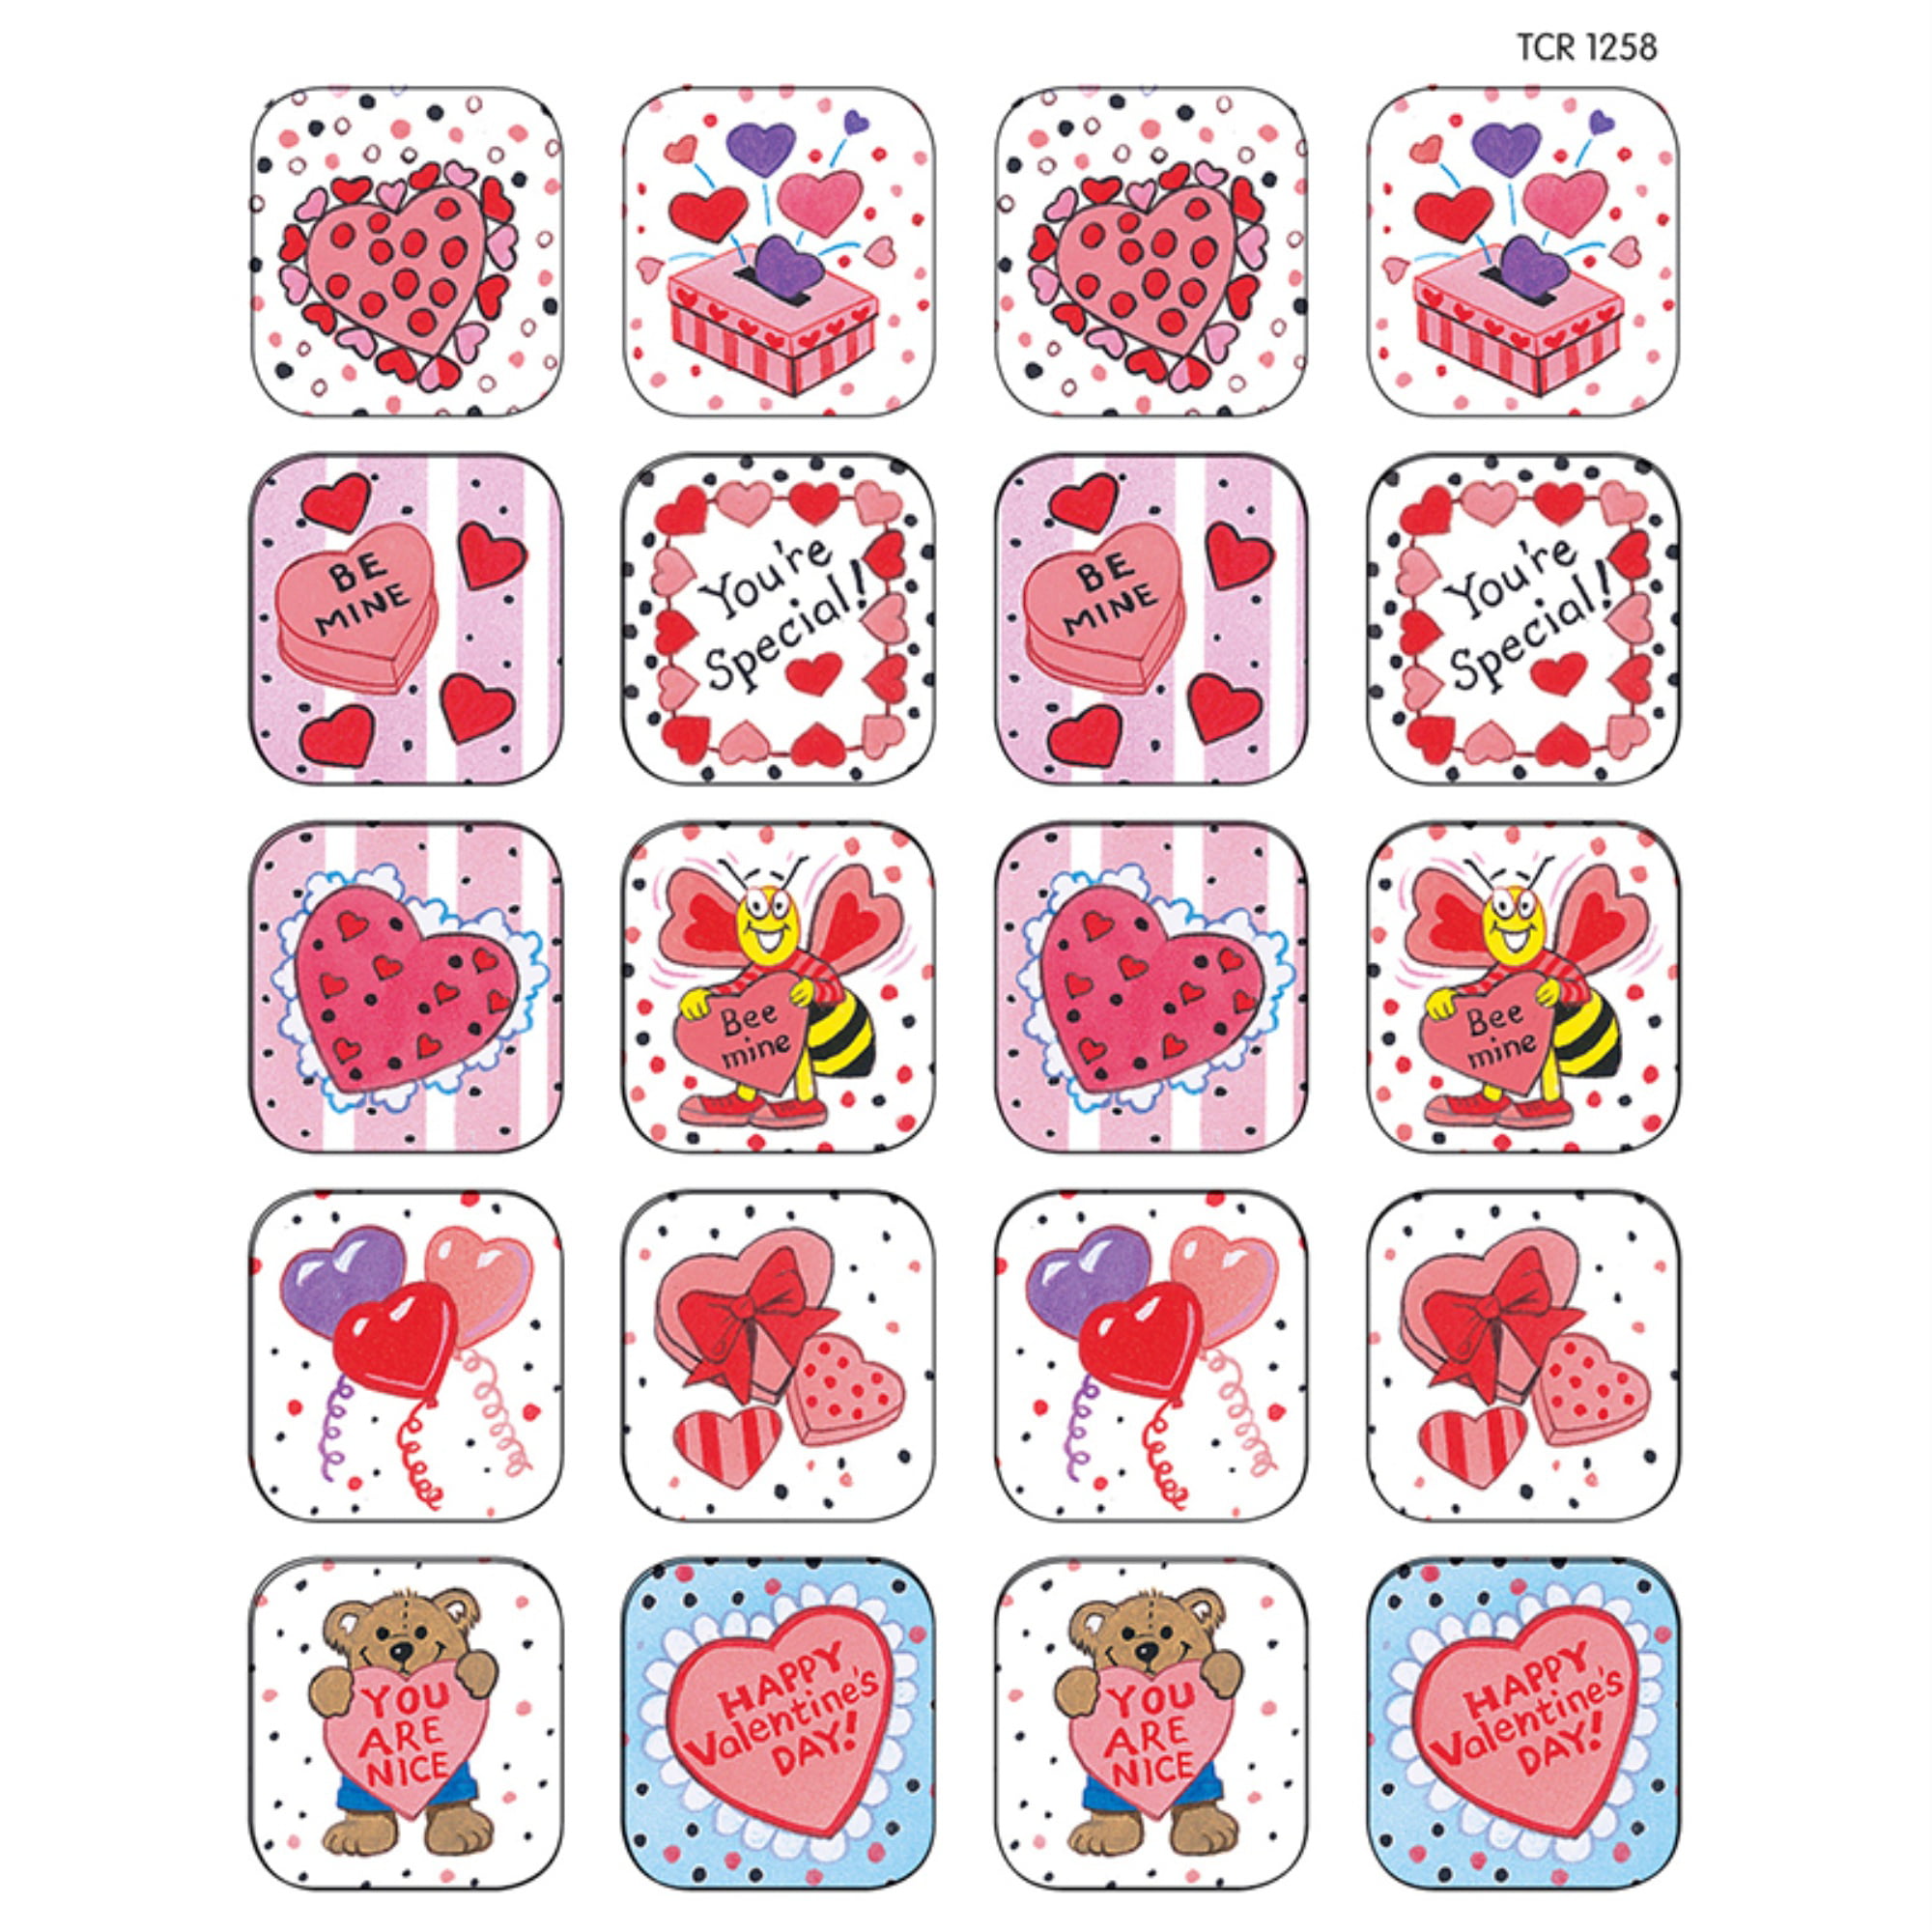 Assorted Valentines stickers circular or heart-shaped 